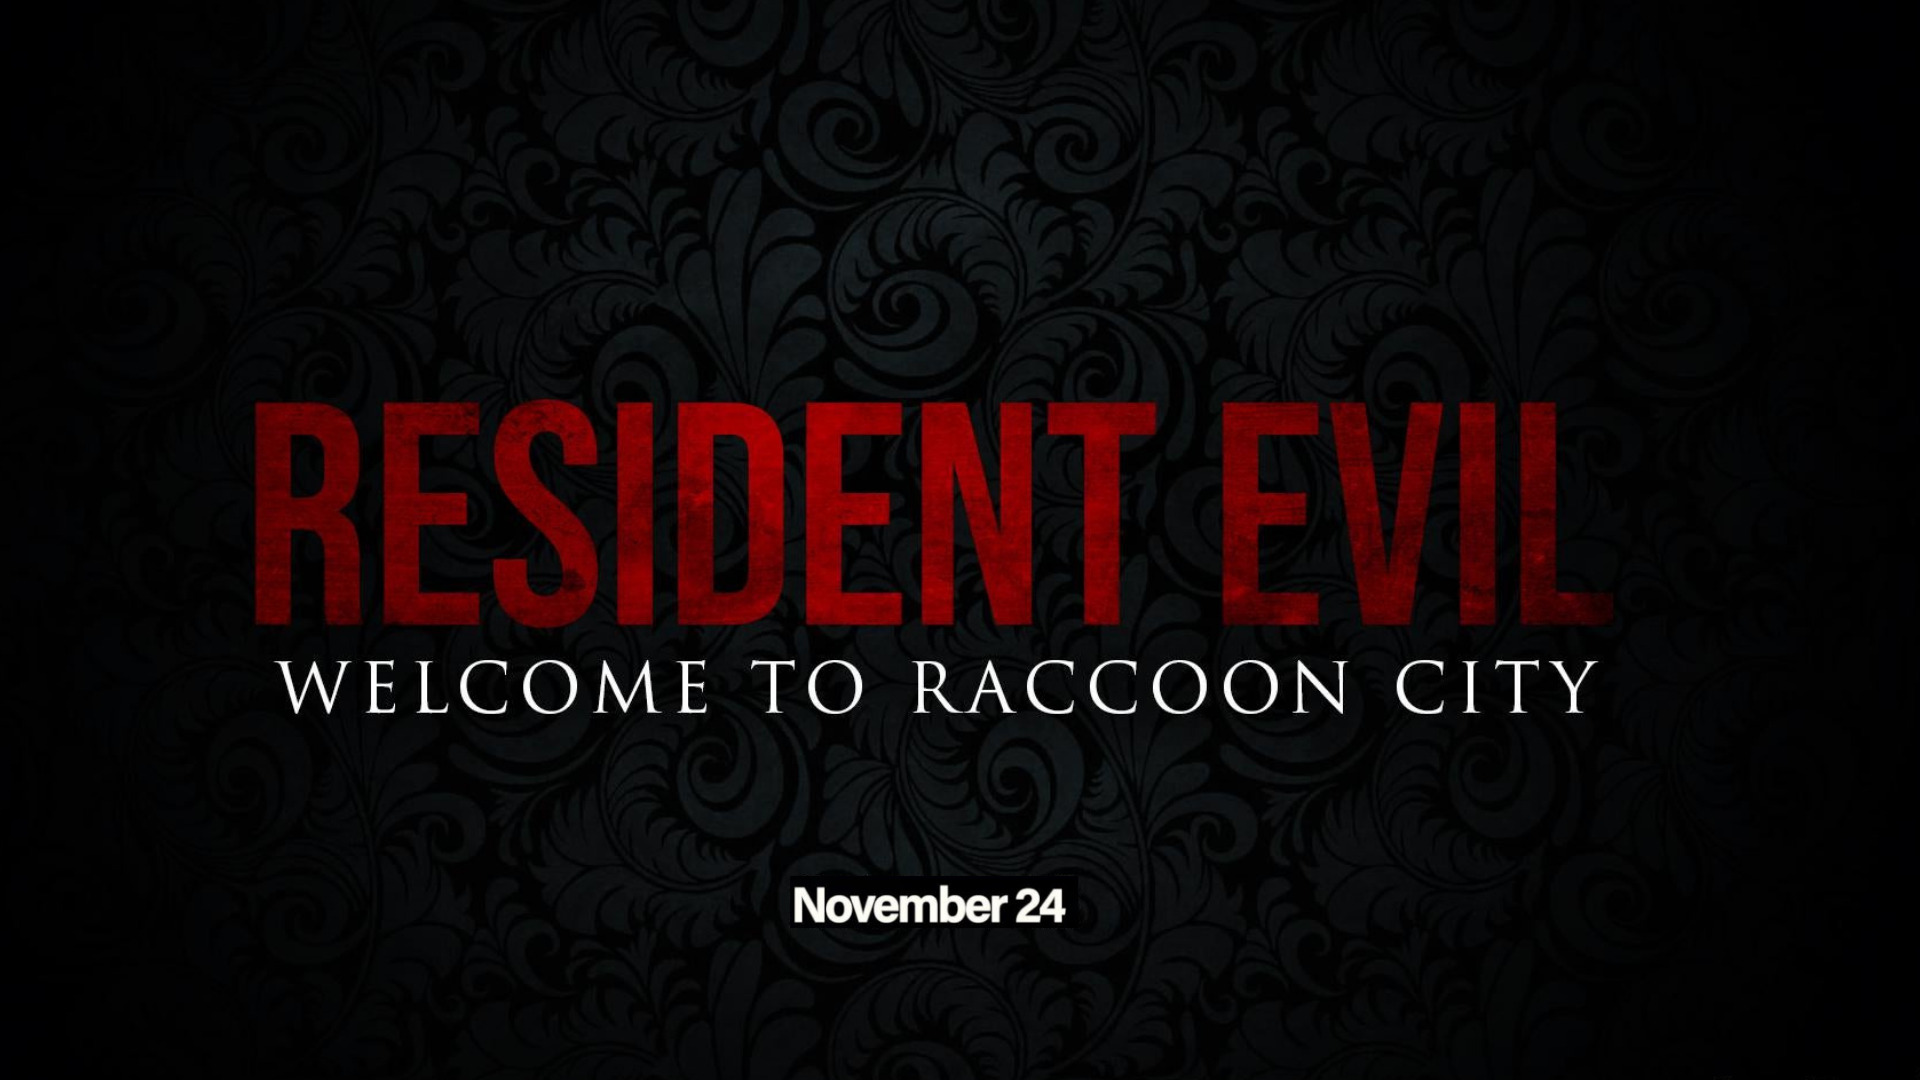 To city welcome raccoon Watch ‘Resident